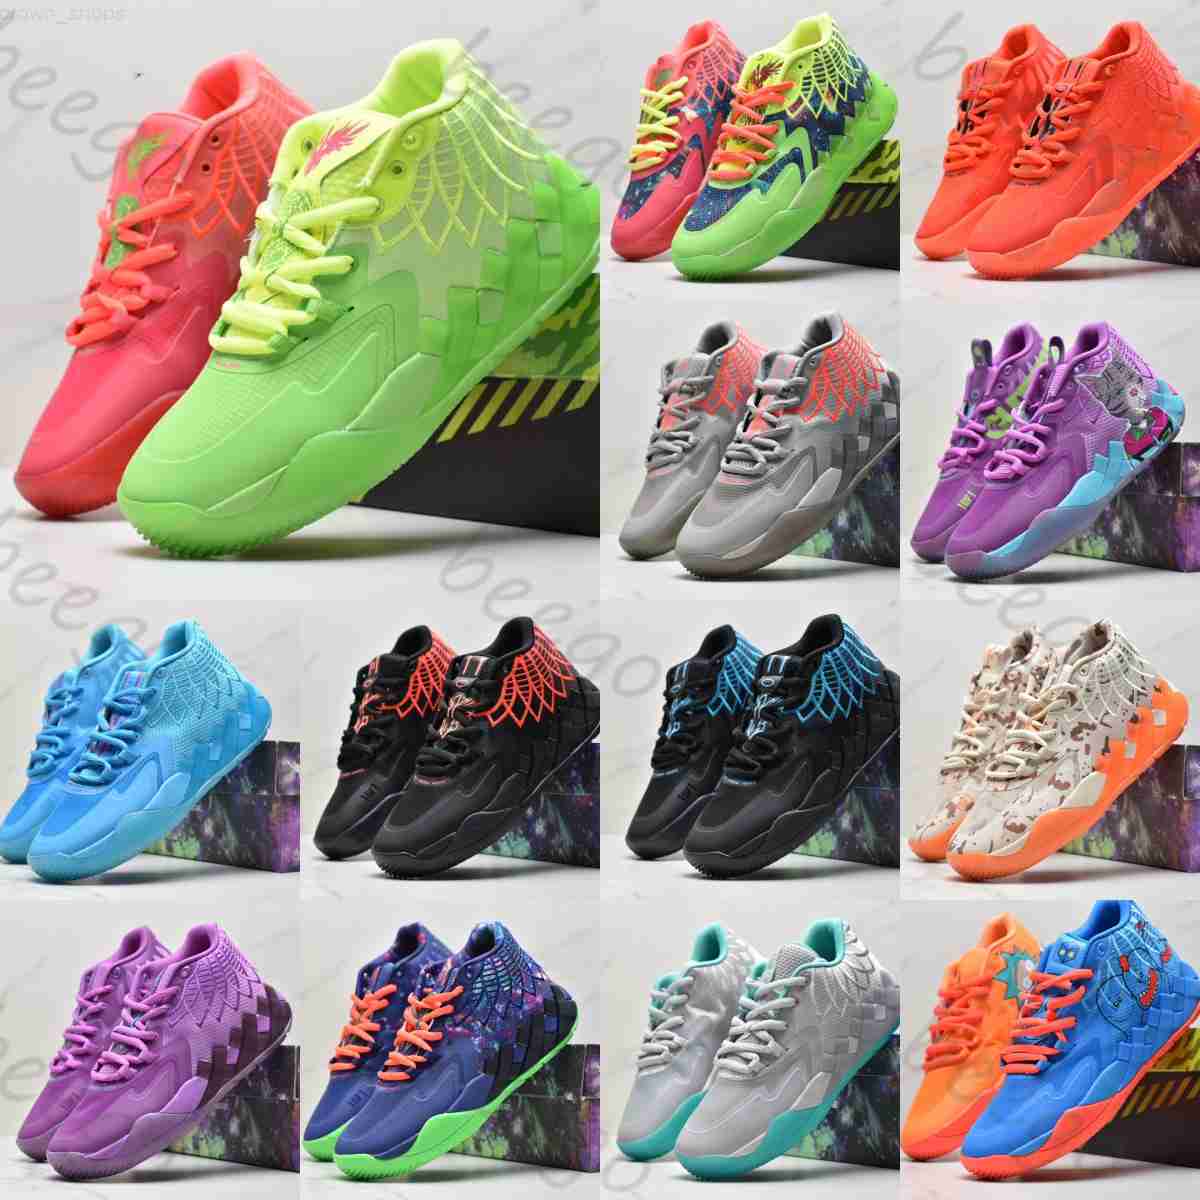 

Basketball Shoes MB 1 Rick And Morty for sale LaMelos Ball Men Women Iridescent Dreams Buzz City Rock Ridge Red Galaxy Not Lamelo, #5